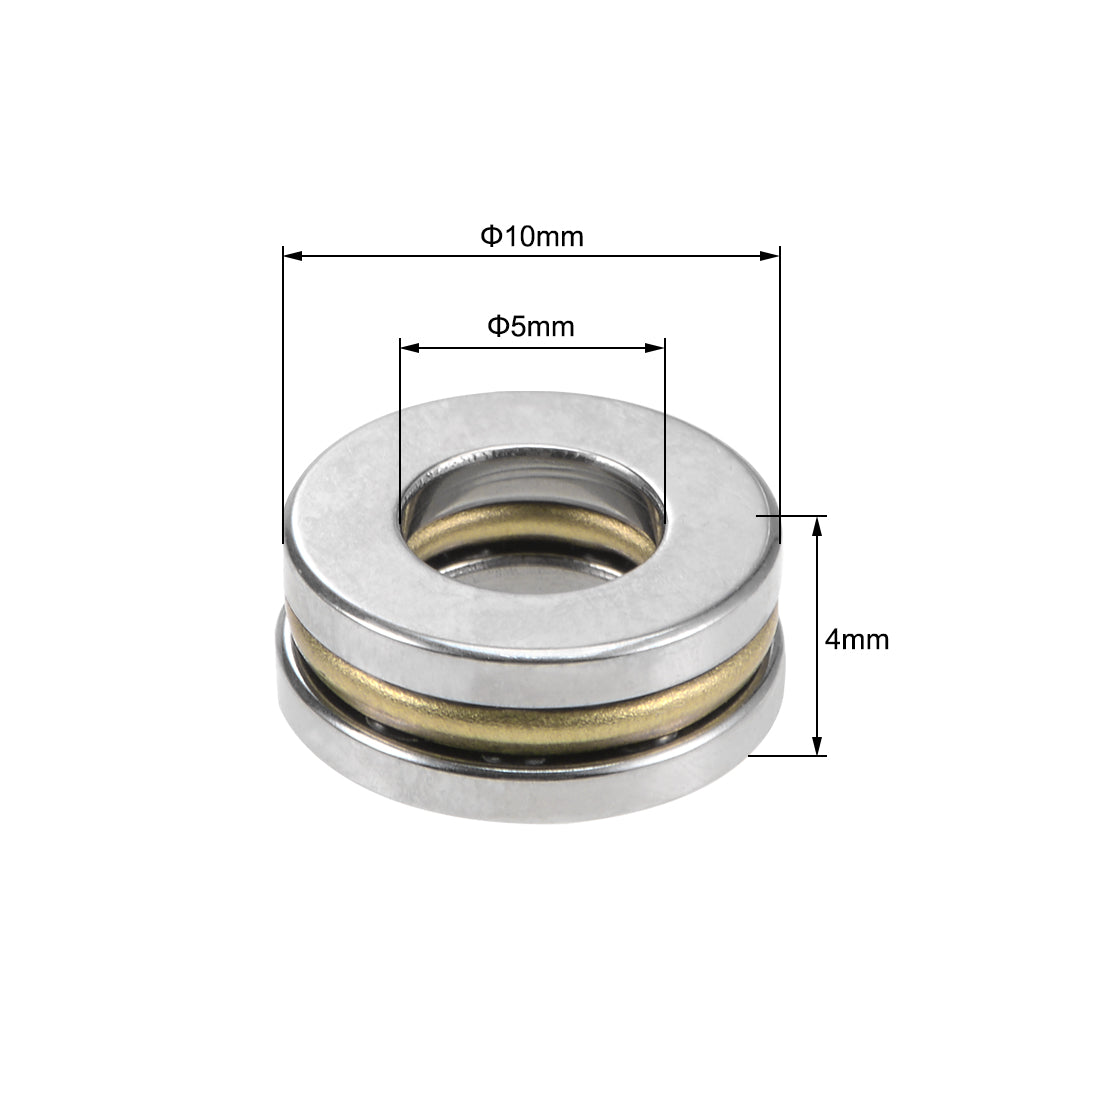 uxcell Uxcell F5-10M Miniature Thrust Ball Bearing 5x10x4mm Chrome Steel with Washer 10Pcs